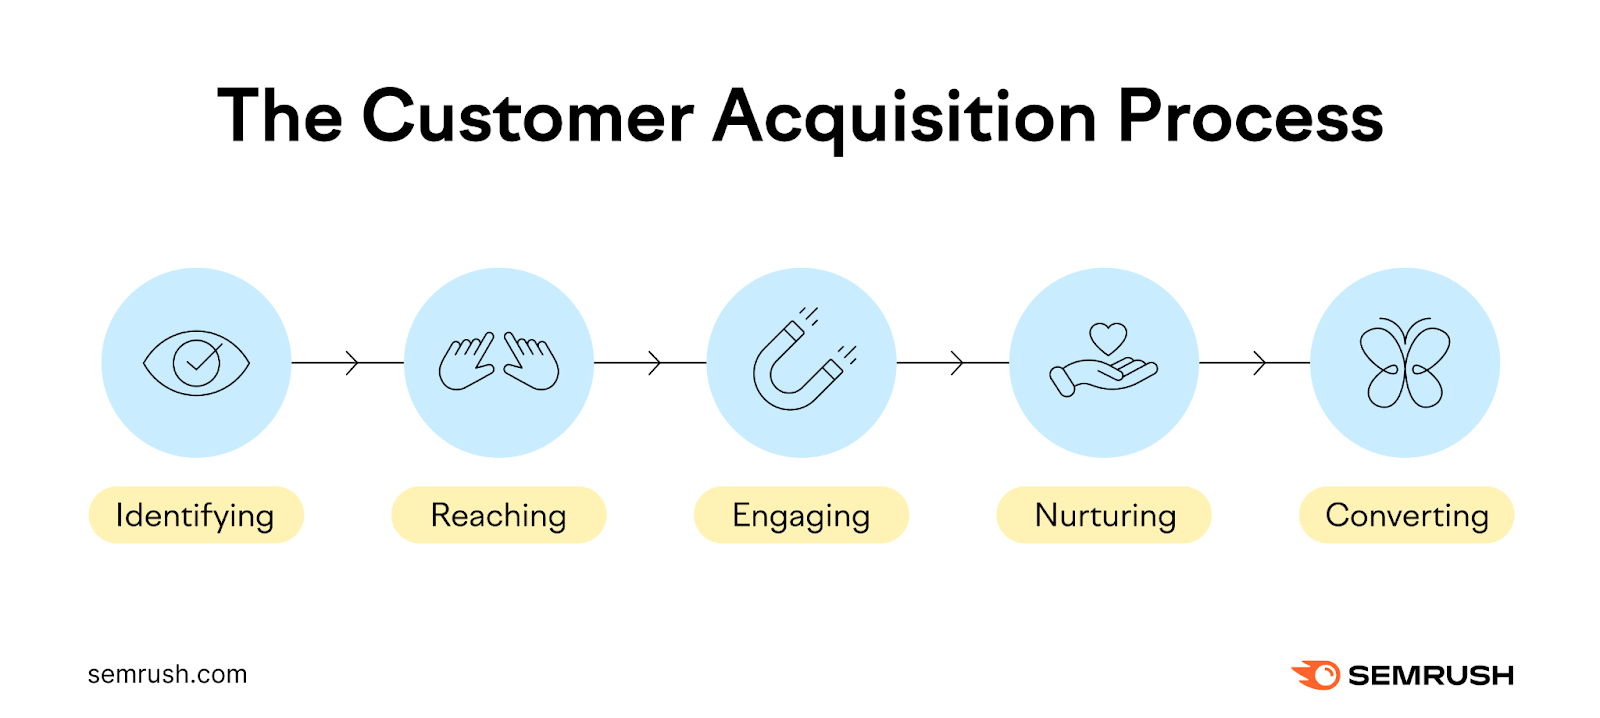 Customer Acquisition: How to Win New Customers